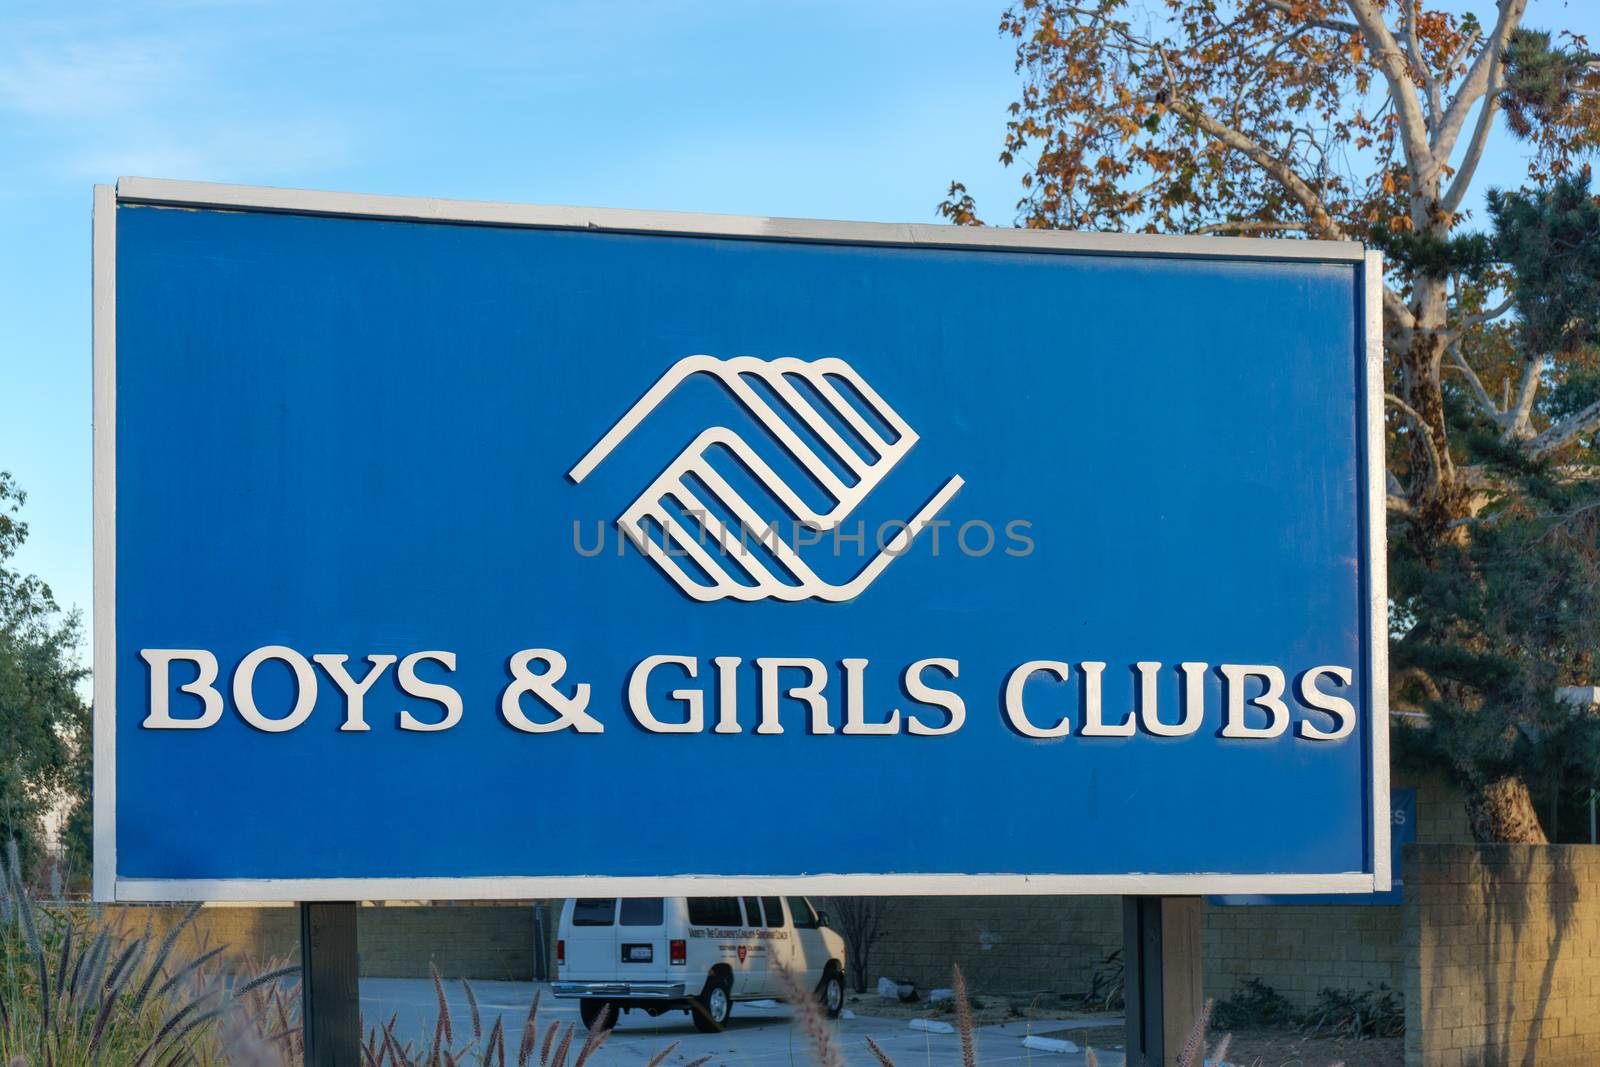 PASADENA, CA/USA - JANUARY 2, 2016: Boys & Girls Club sign and logo. Boys & Girls Clubs of America is a national providing after-school programs for young people.